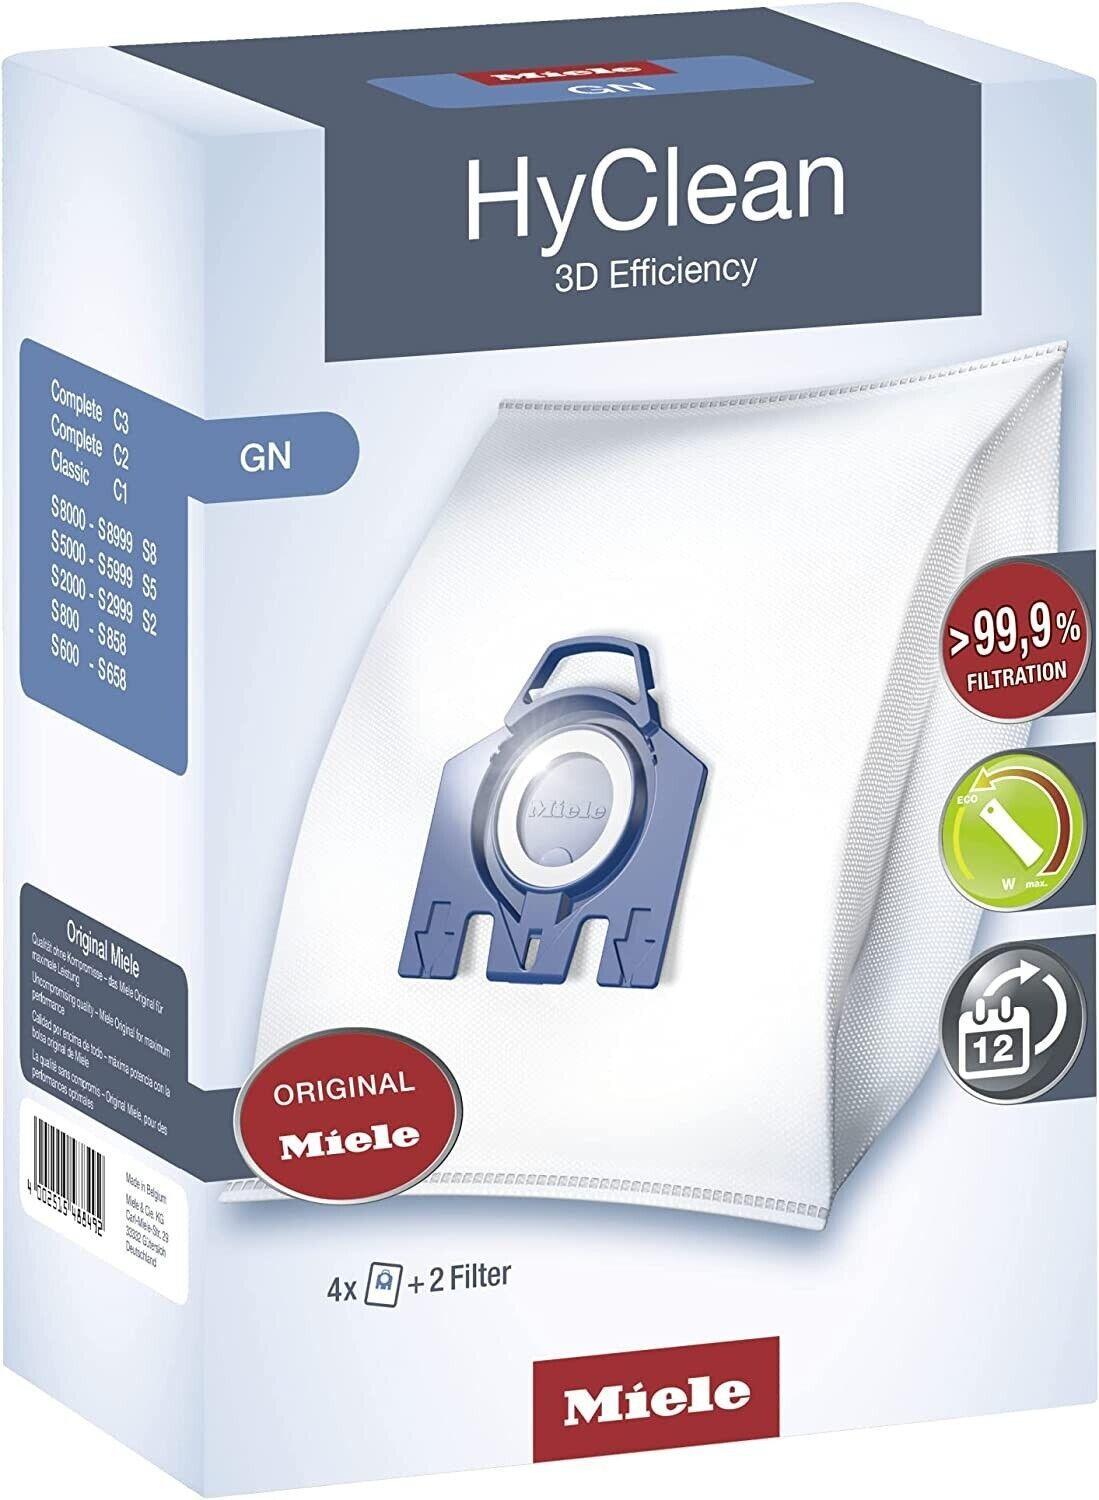 Pack of 4 Efficiency GN Dustbags White Miele 09917730-Hyclean 3D